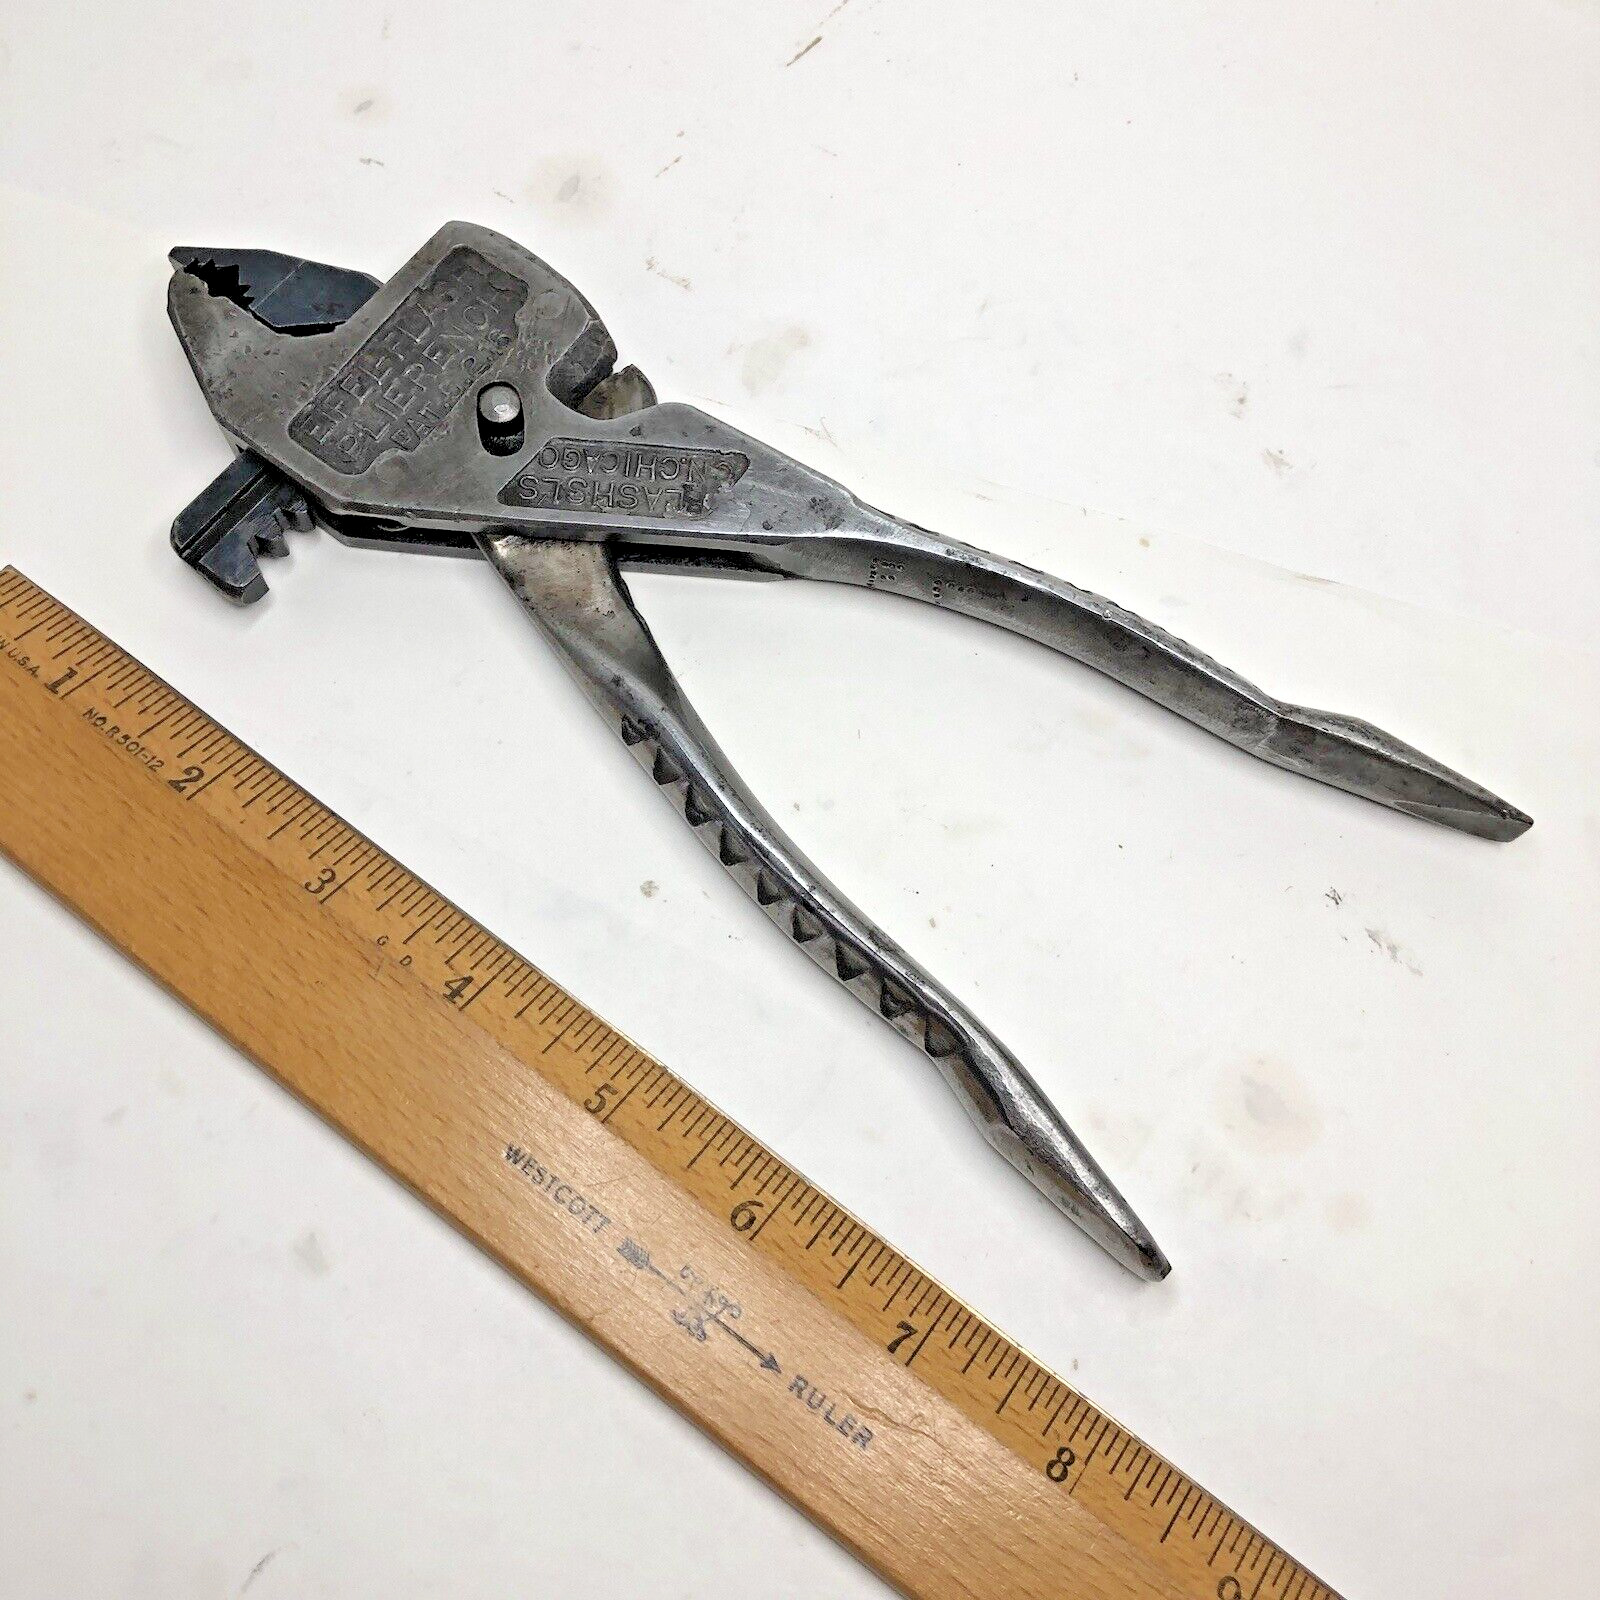 Antique EIFEL-FLASH PLIERENCH Adjustable Wrench Pliers Pat.5.2.16 Chicago USA